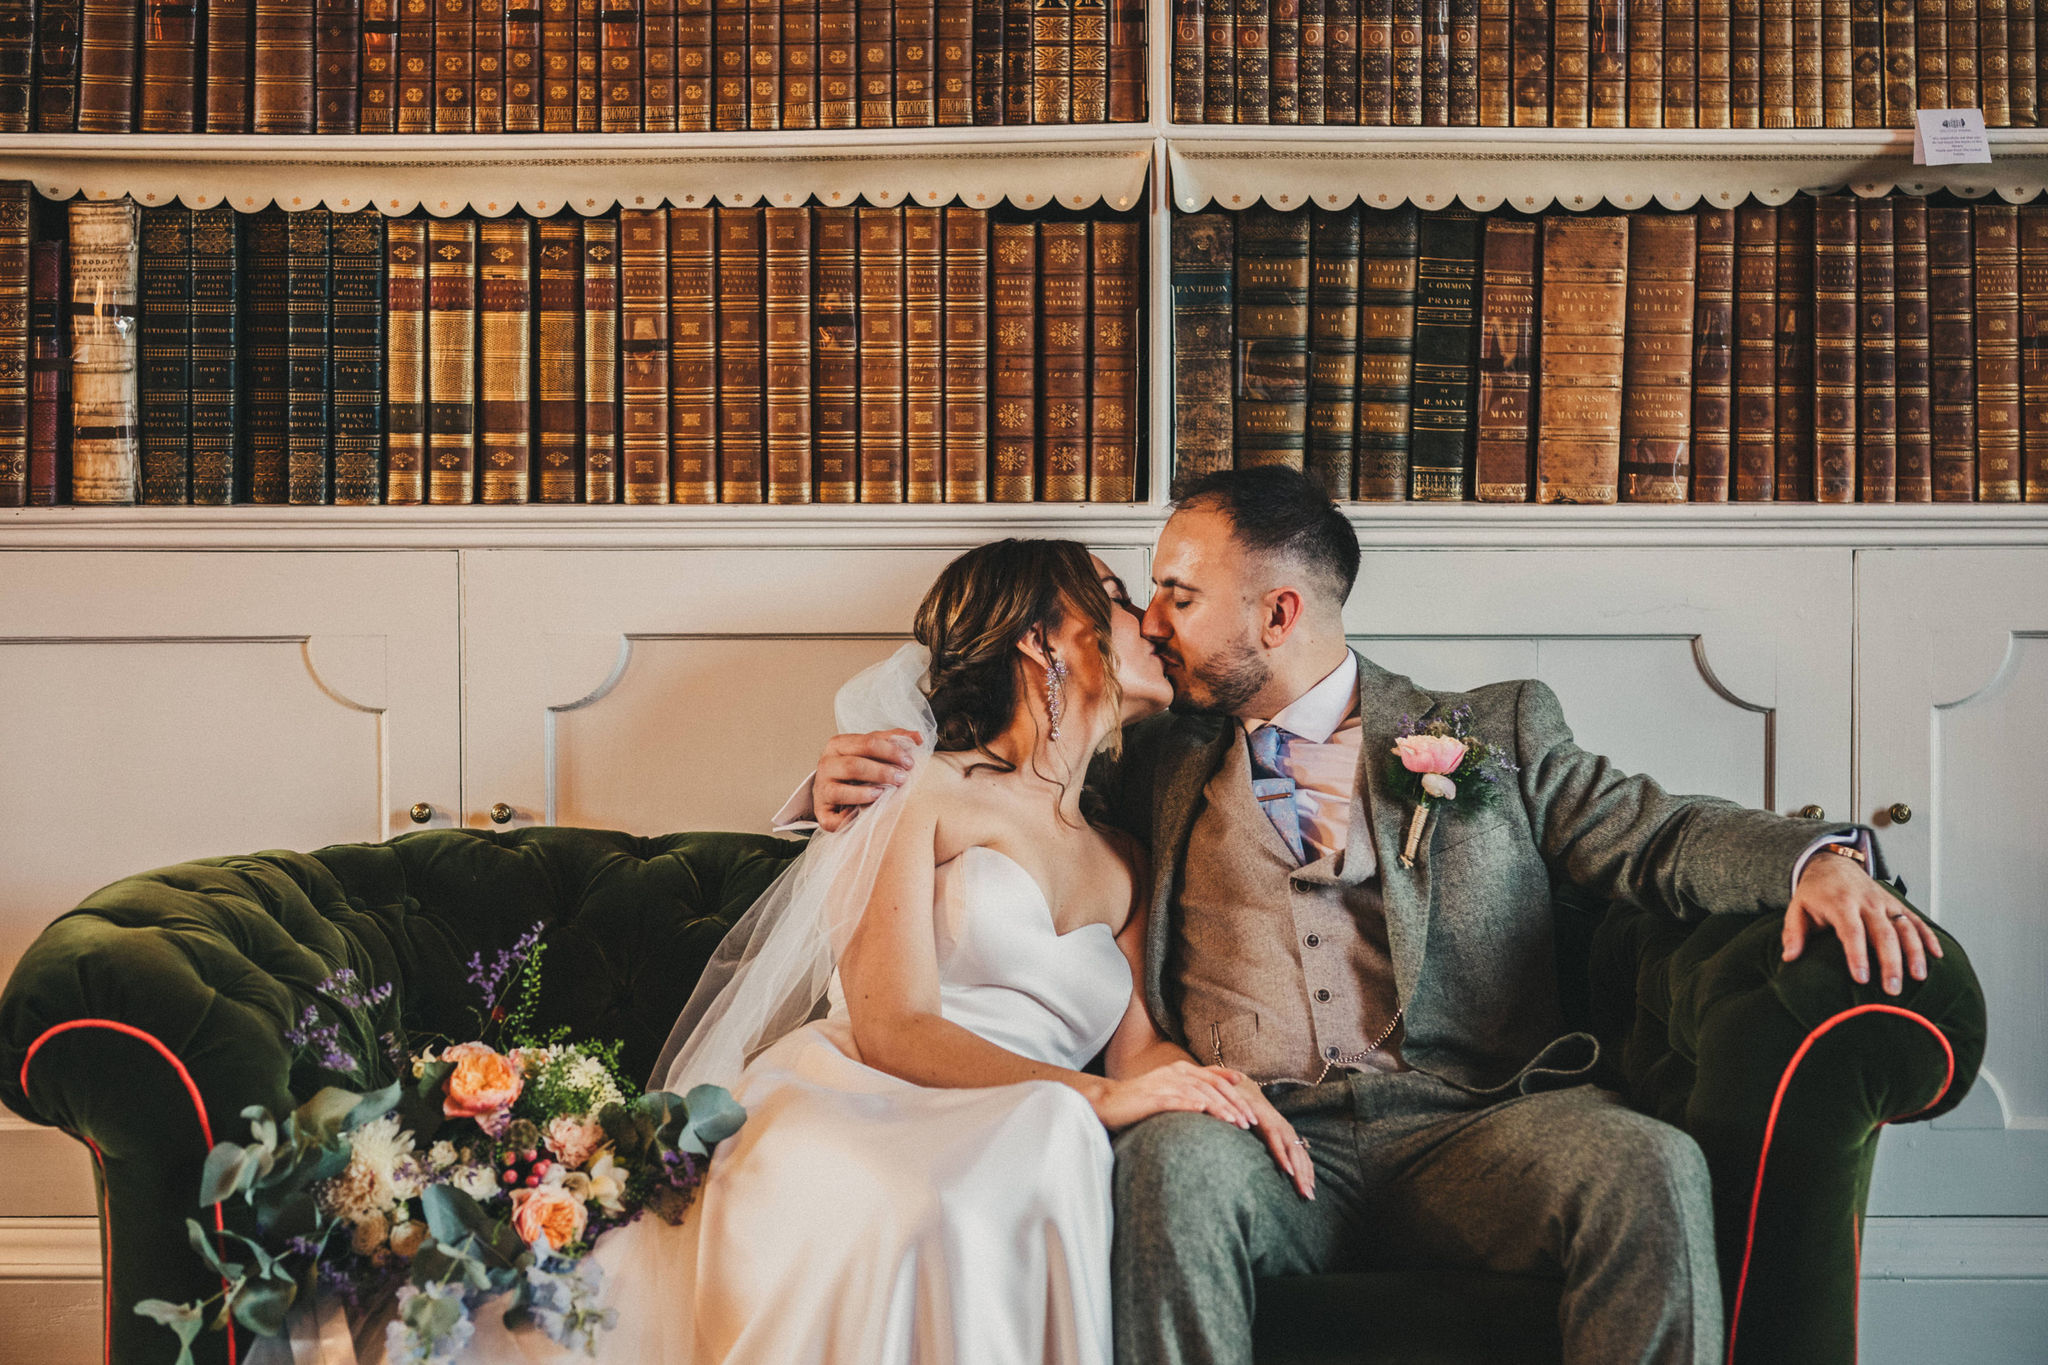 Bride and groom embracing on a dark green velvet Chesterfield sofa with bookshelves of books behind them